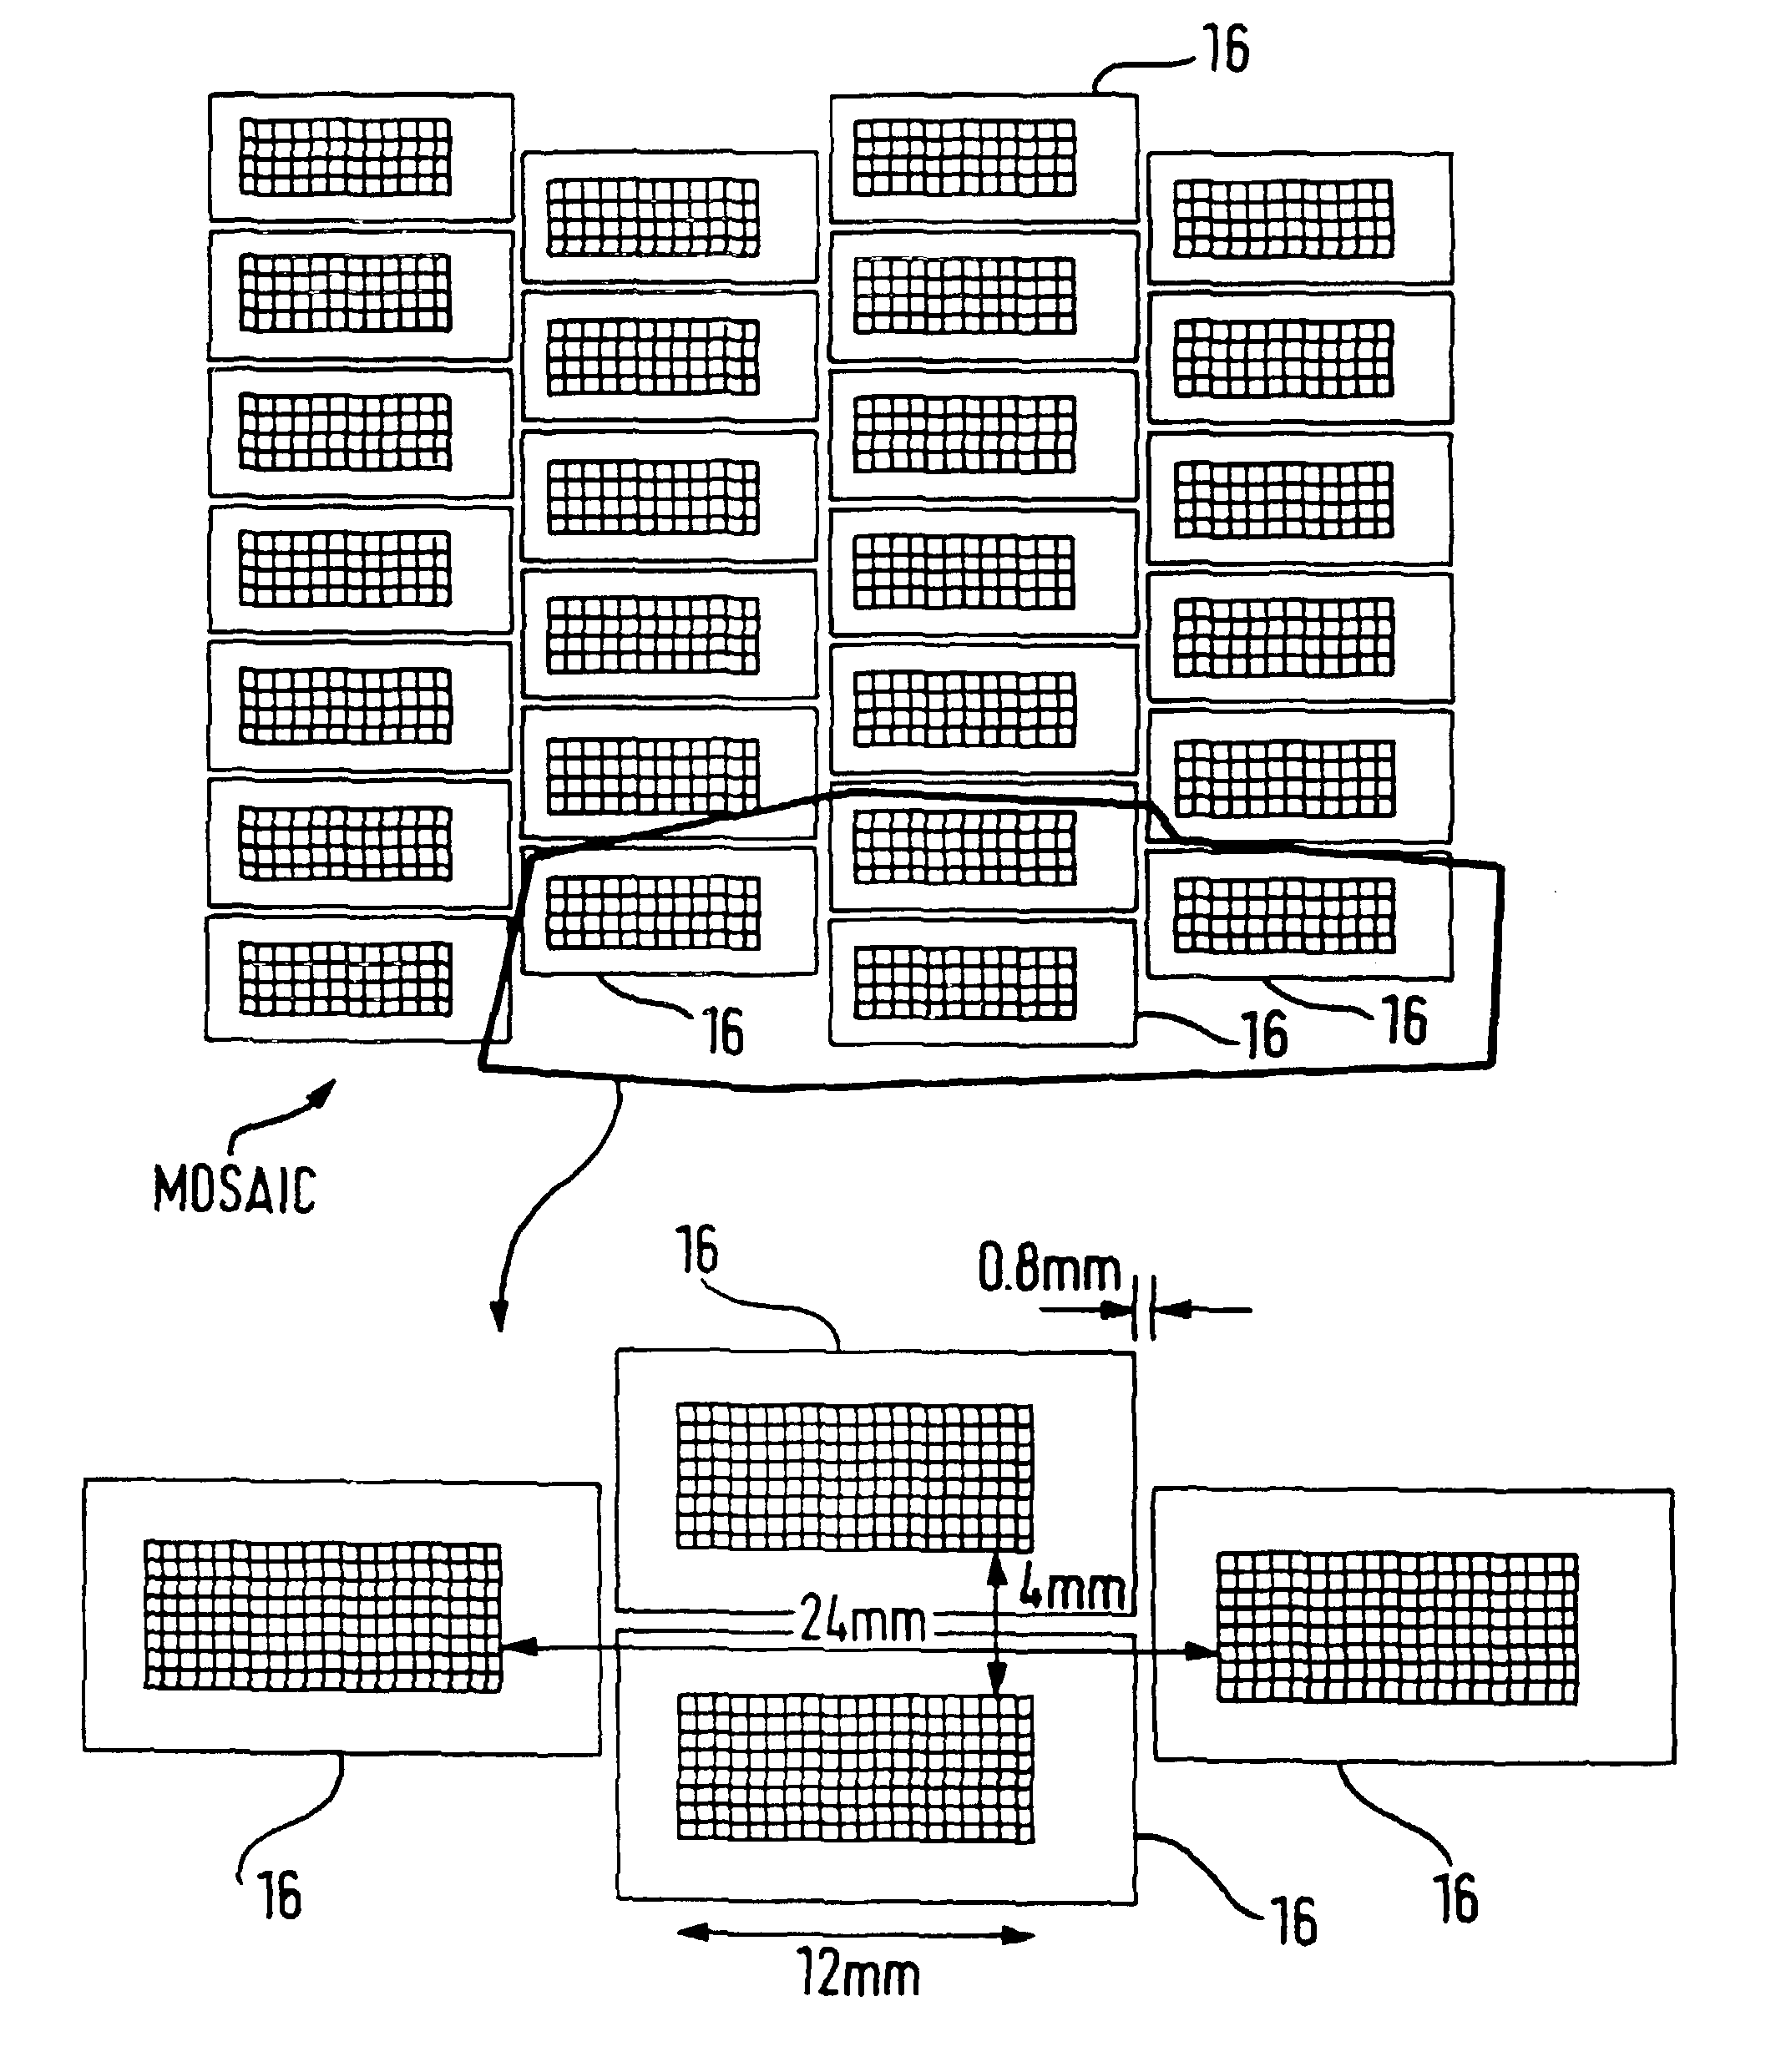 Imaging devices, systems and methods